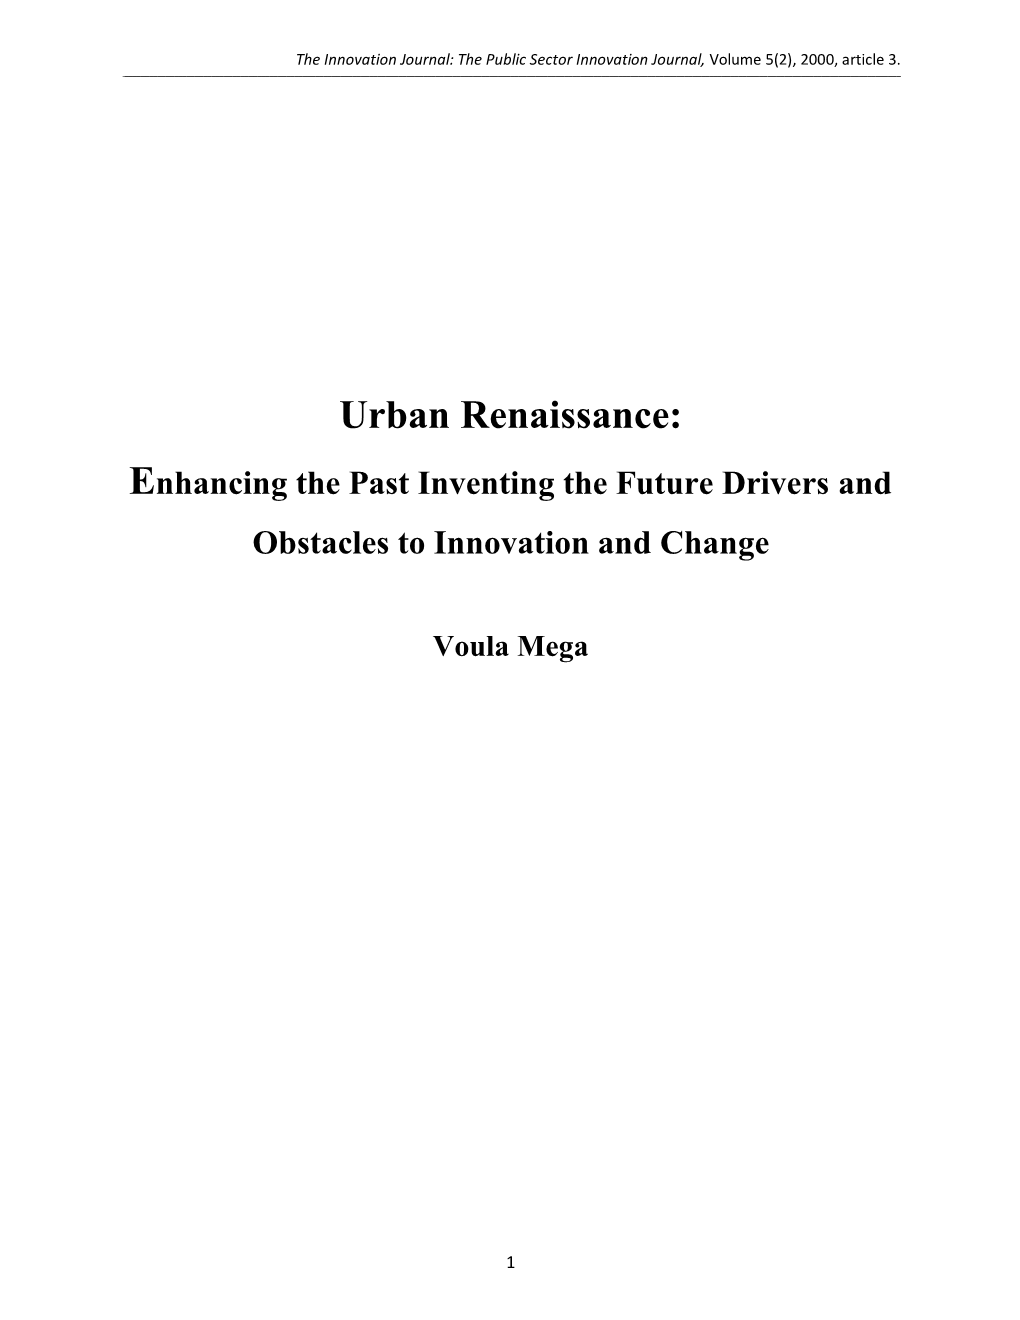 Urban Renaissance: Enhancing the Past Inventing the Future Drivers and Obstacles to Innovation and Change